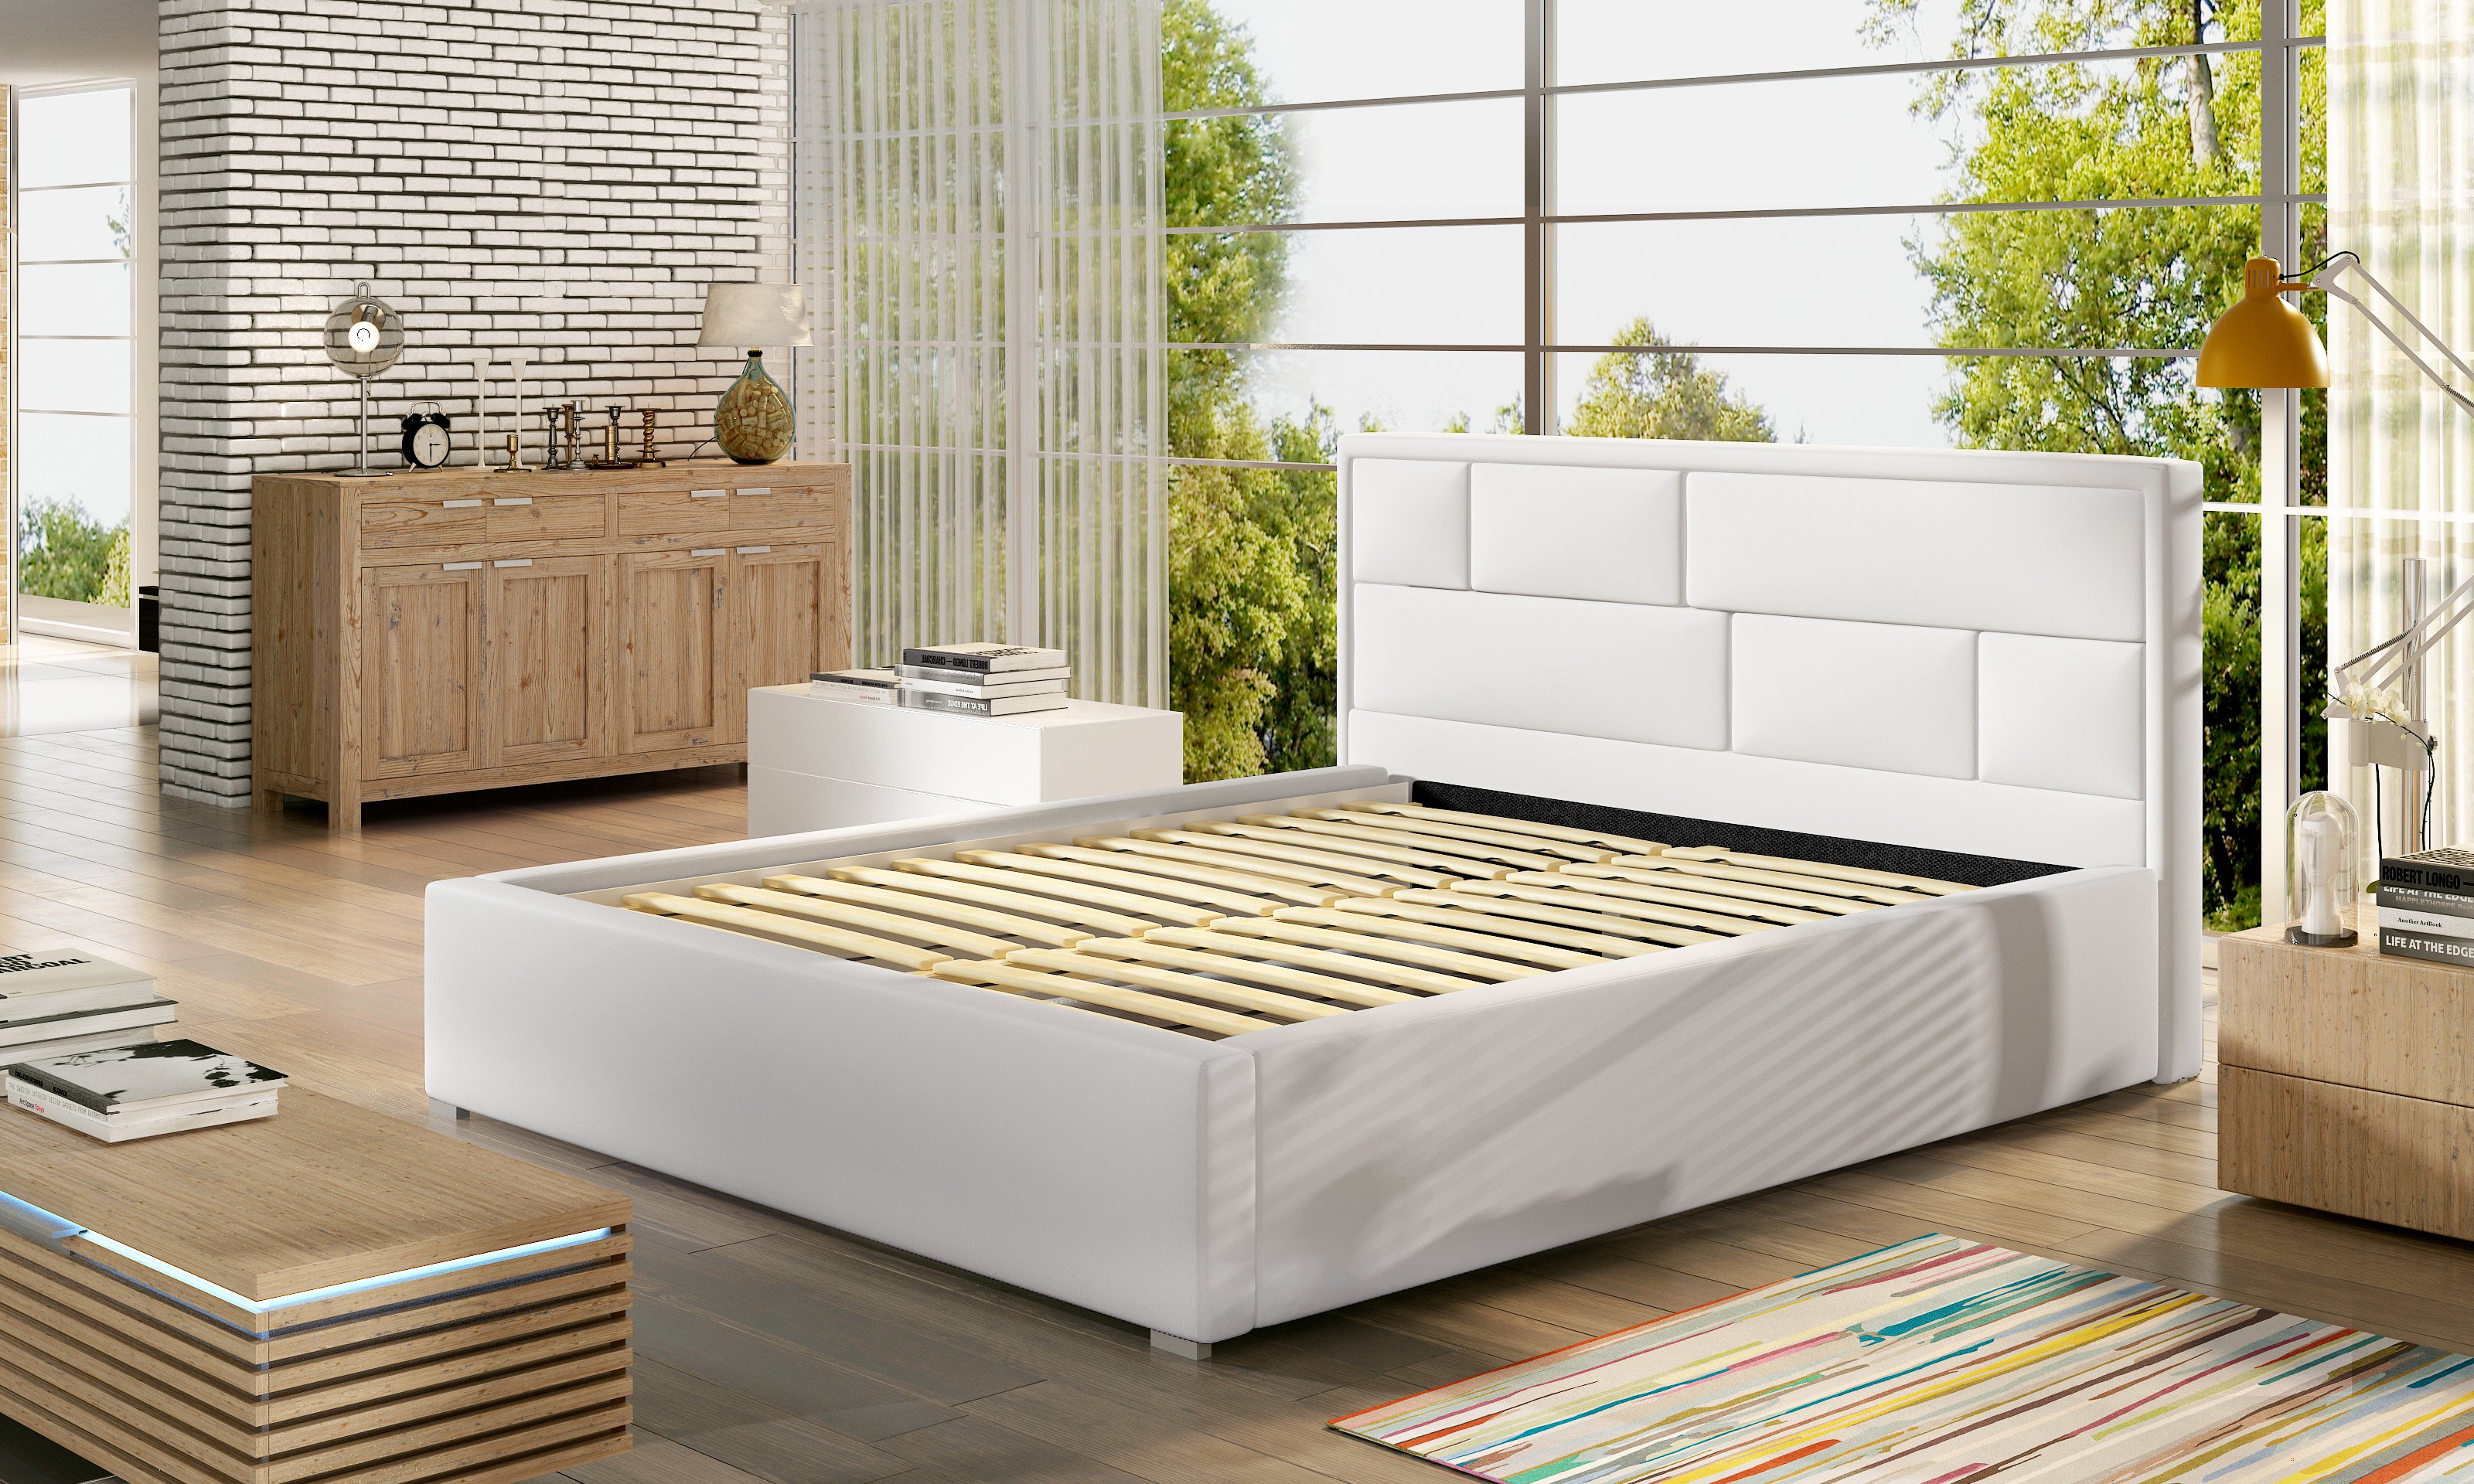 Bed elegance combined with comfort - Iatina